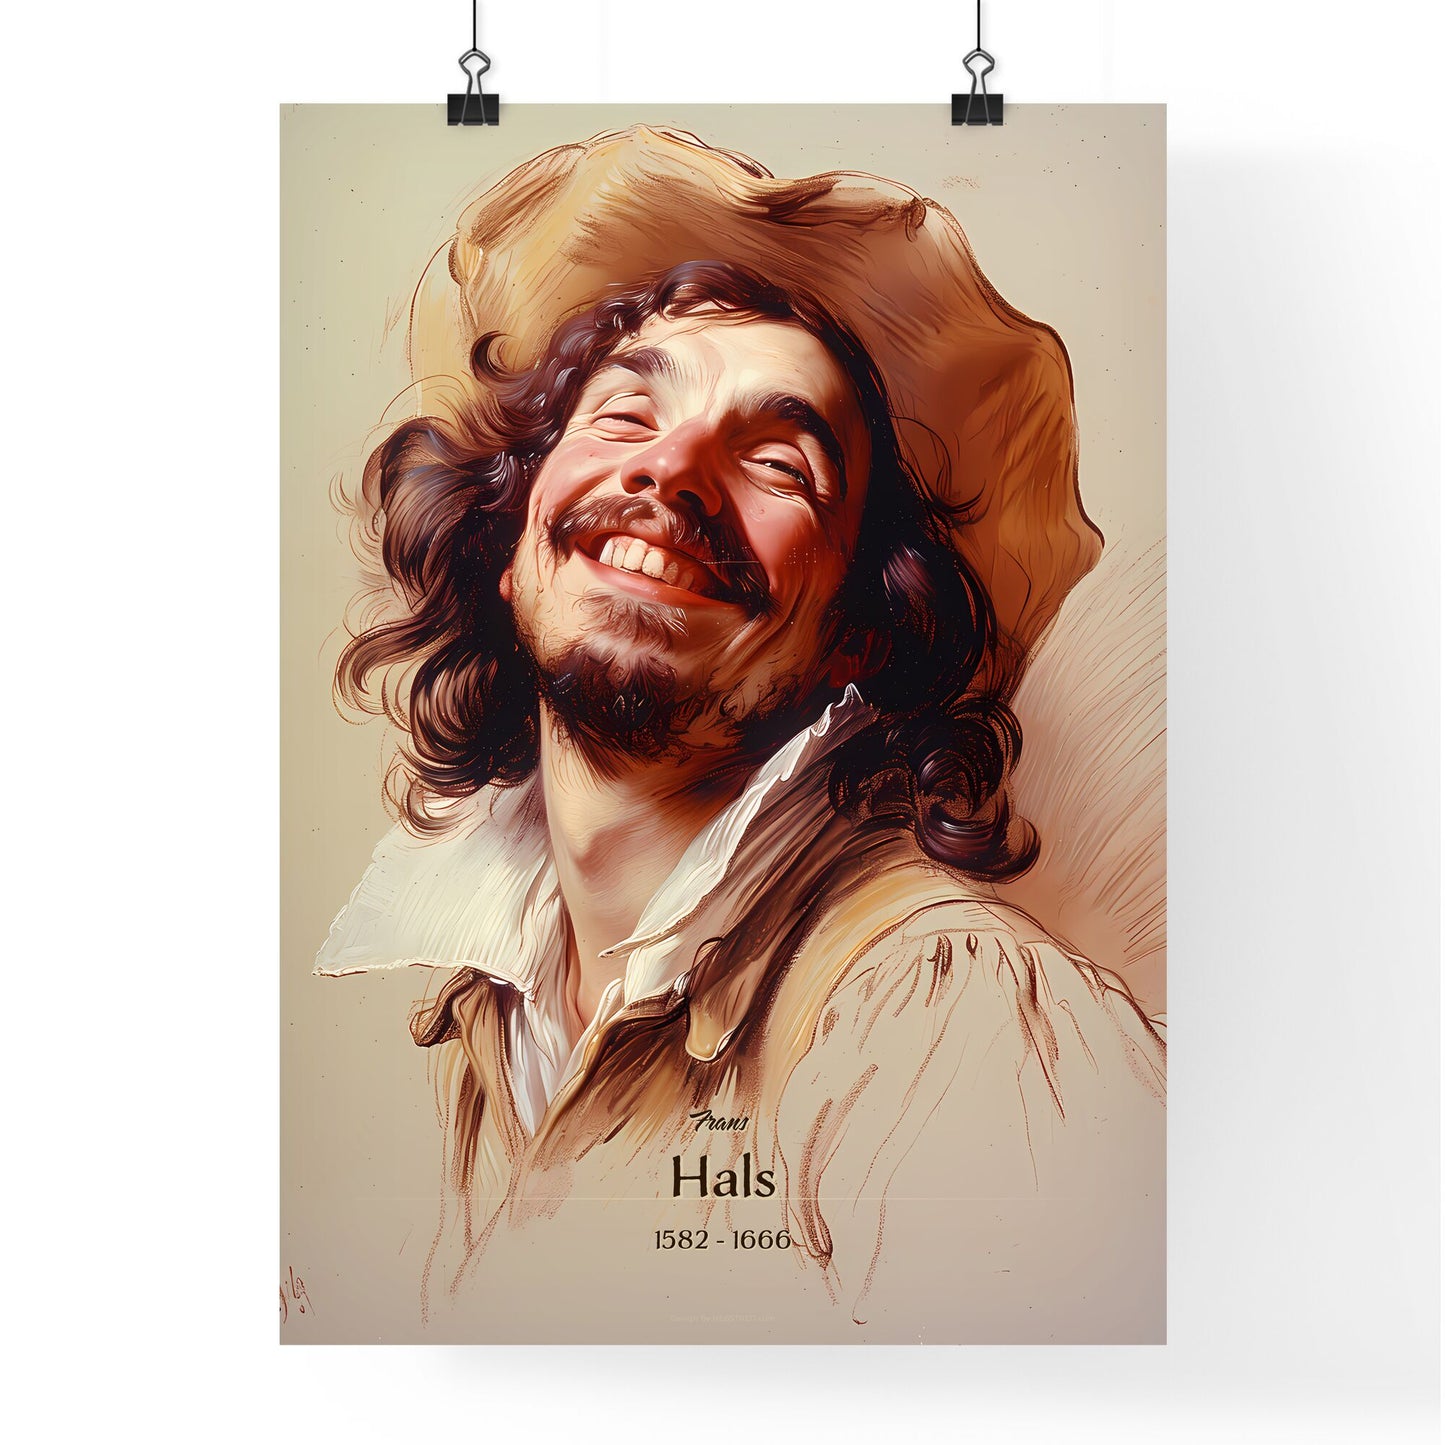 Frans, Hals, 1582 - 1666, A Poster of a man with long hair wearing a hat Default Title